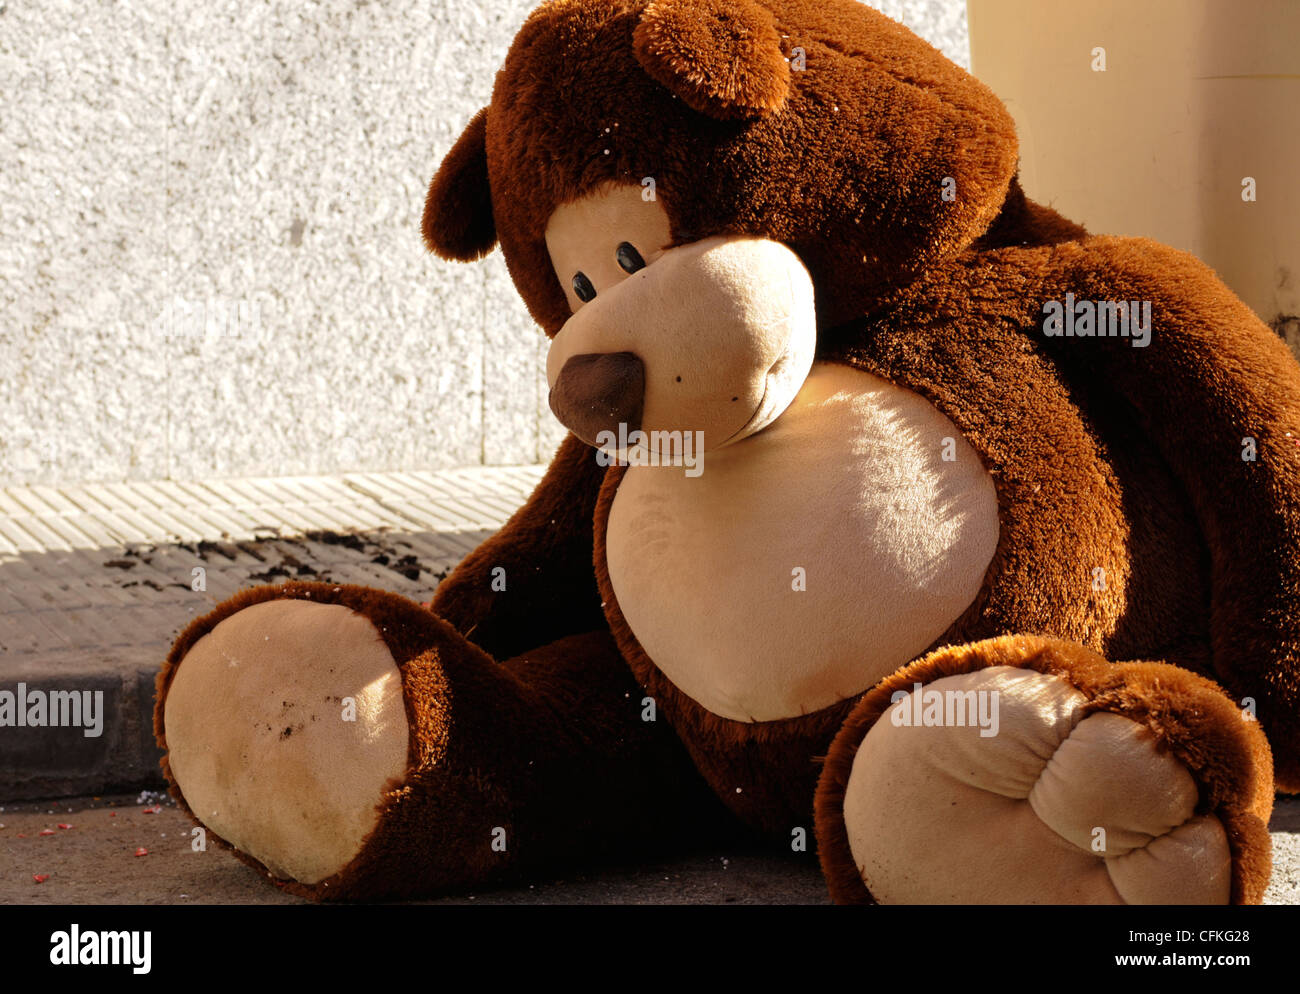 A stuffed bear thrown out in the trash in the Costa Brava. Stock Photo